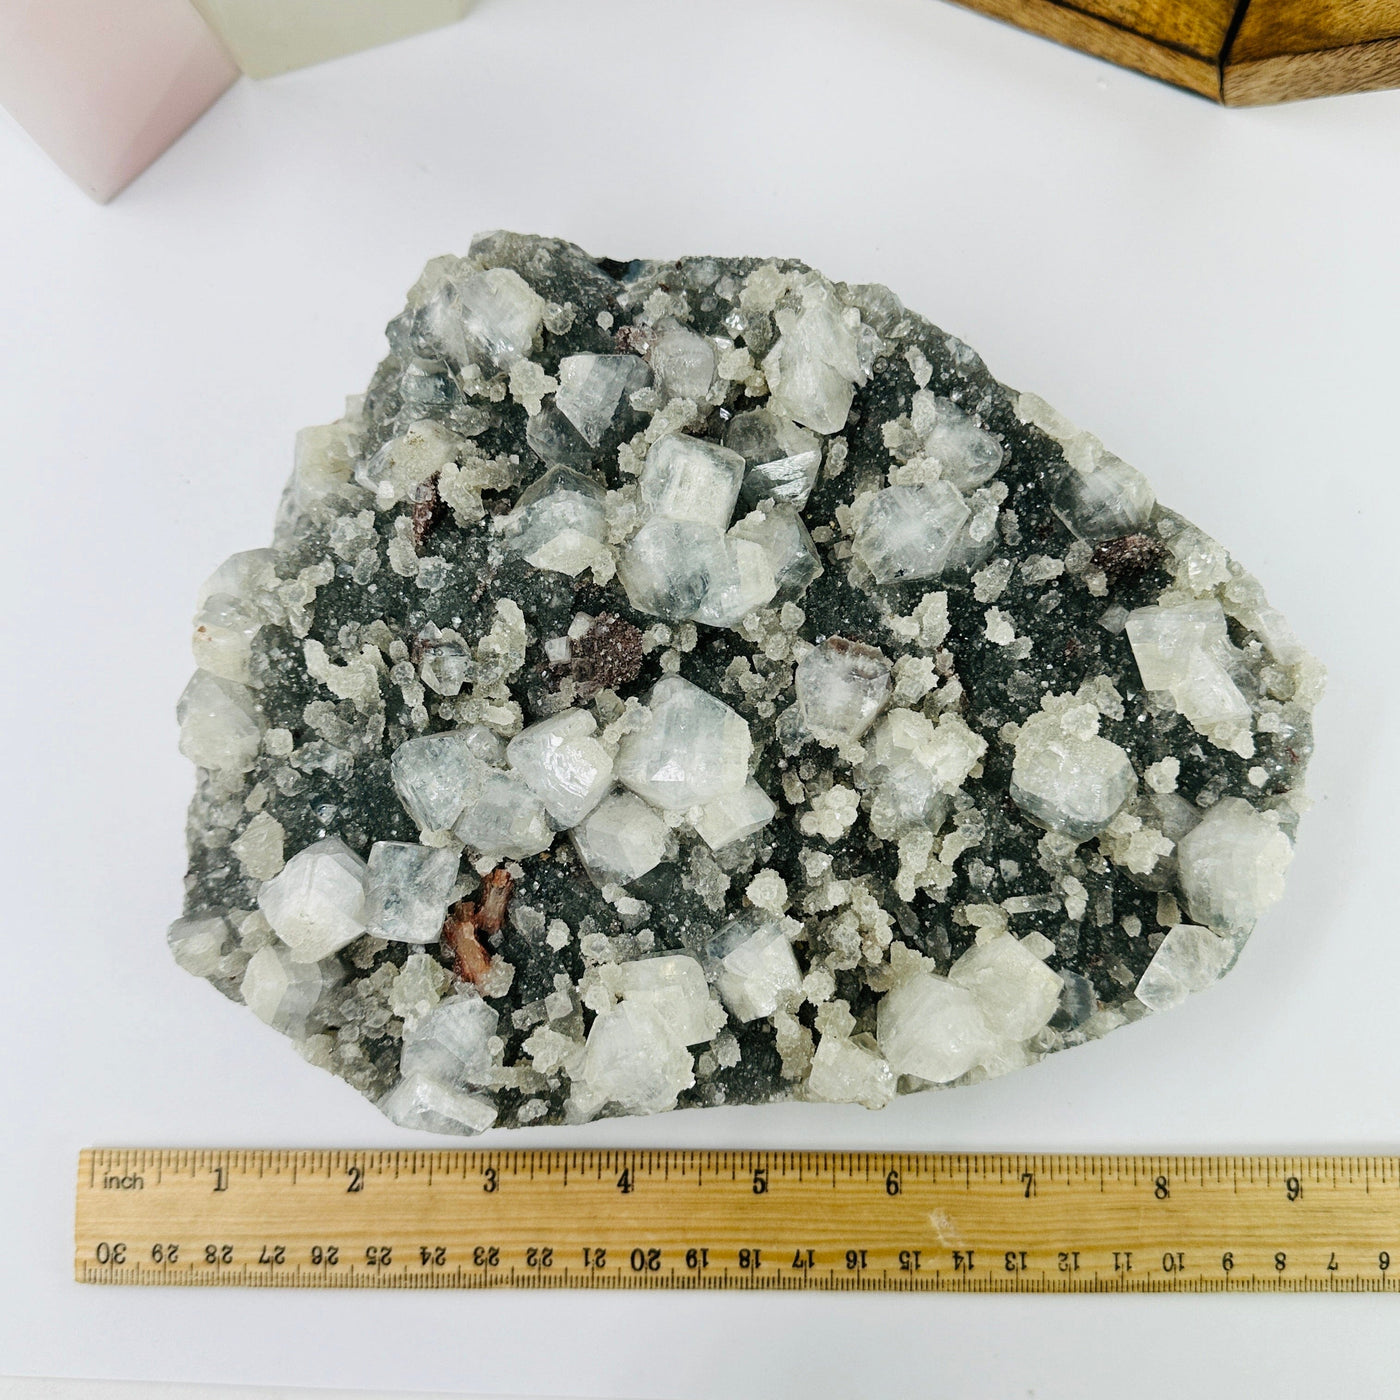 zeolite on matrix next to a ruler for size reference